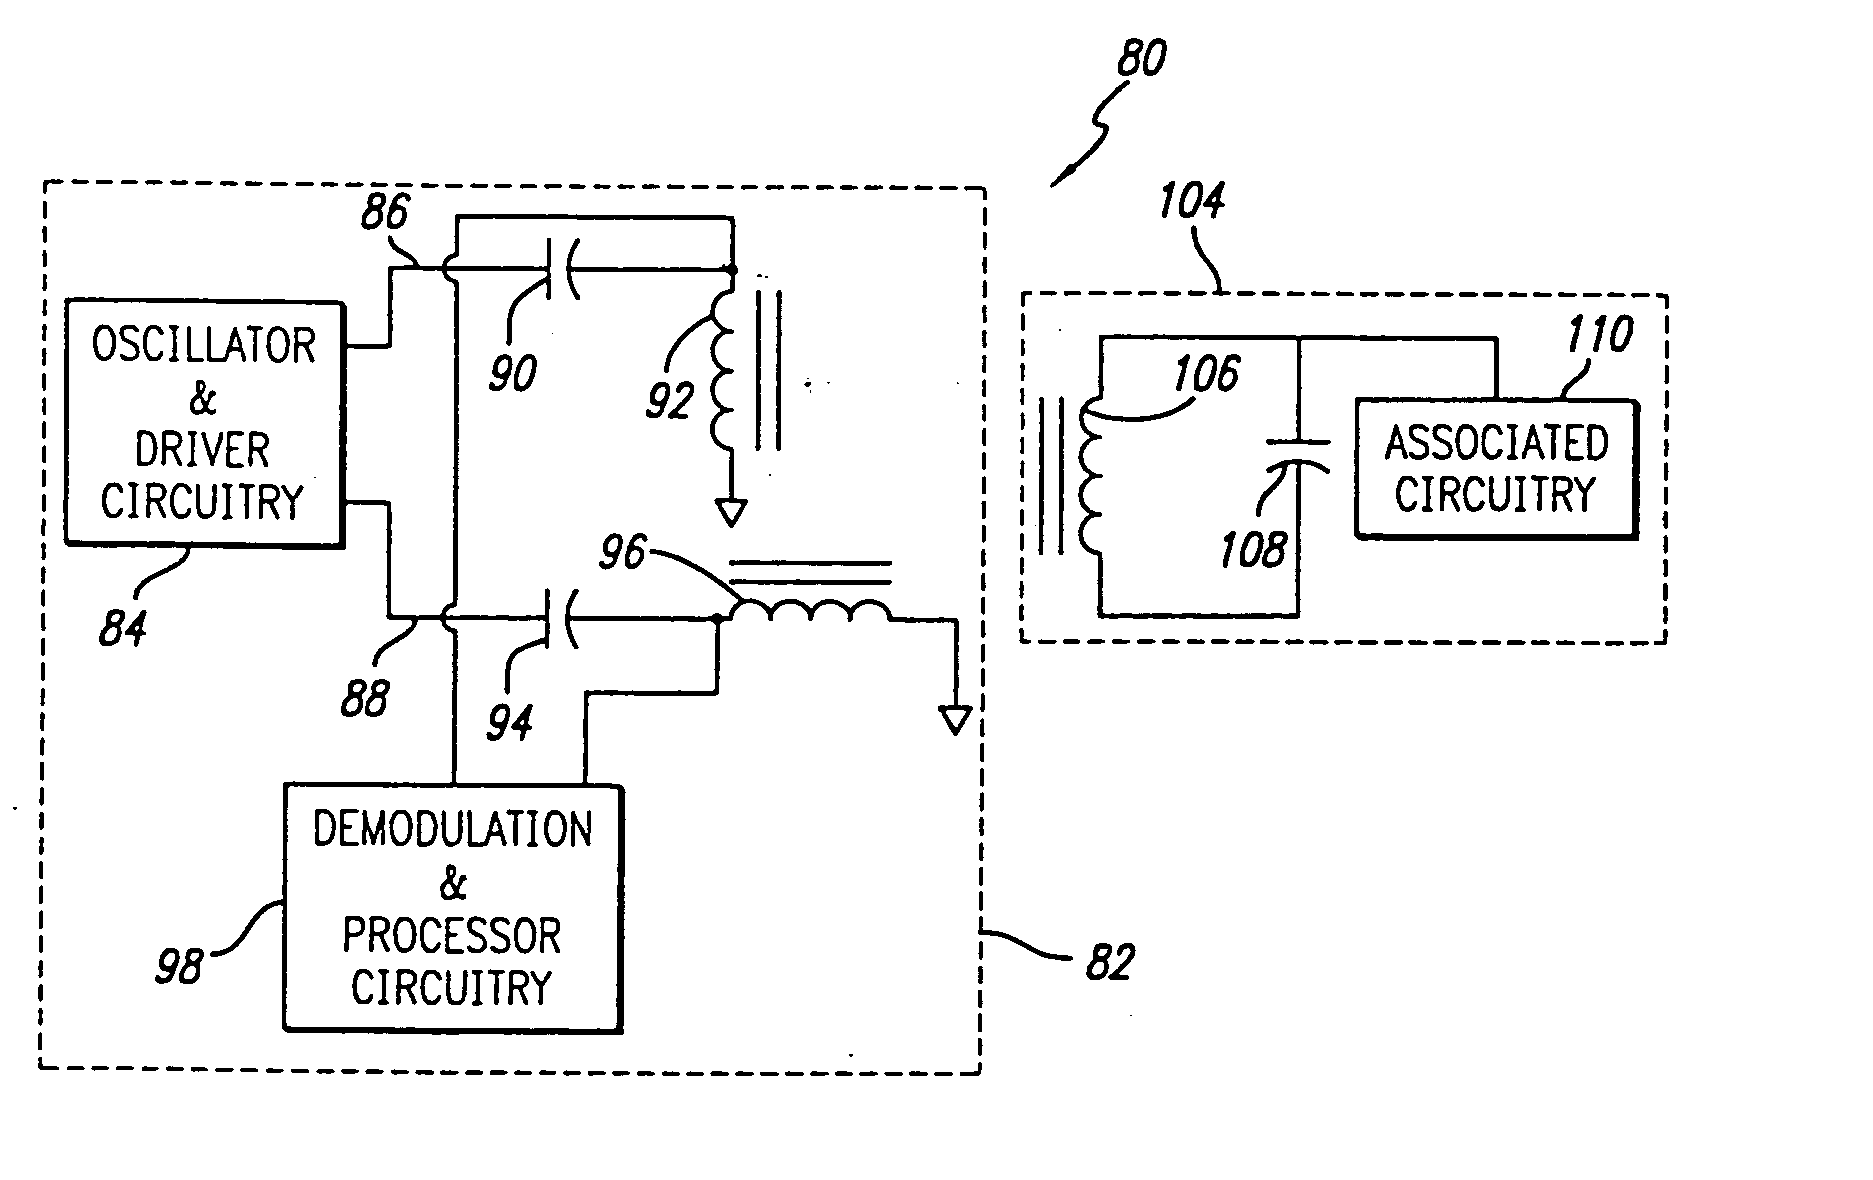 Impedance matching network and multidimensional electromagnetic field coil for a transponder interrogator